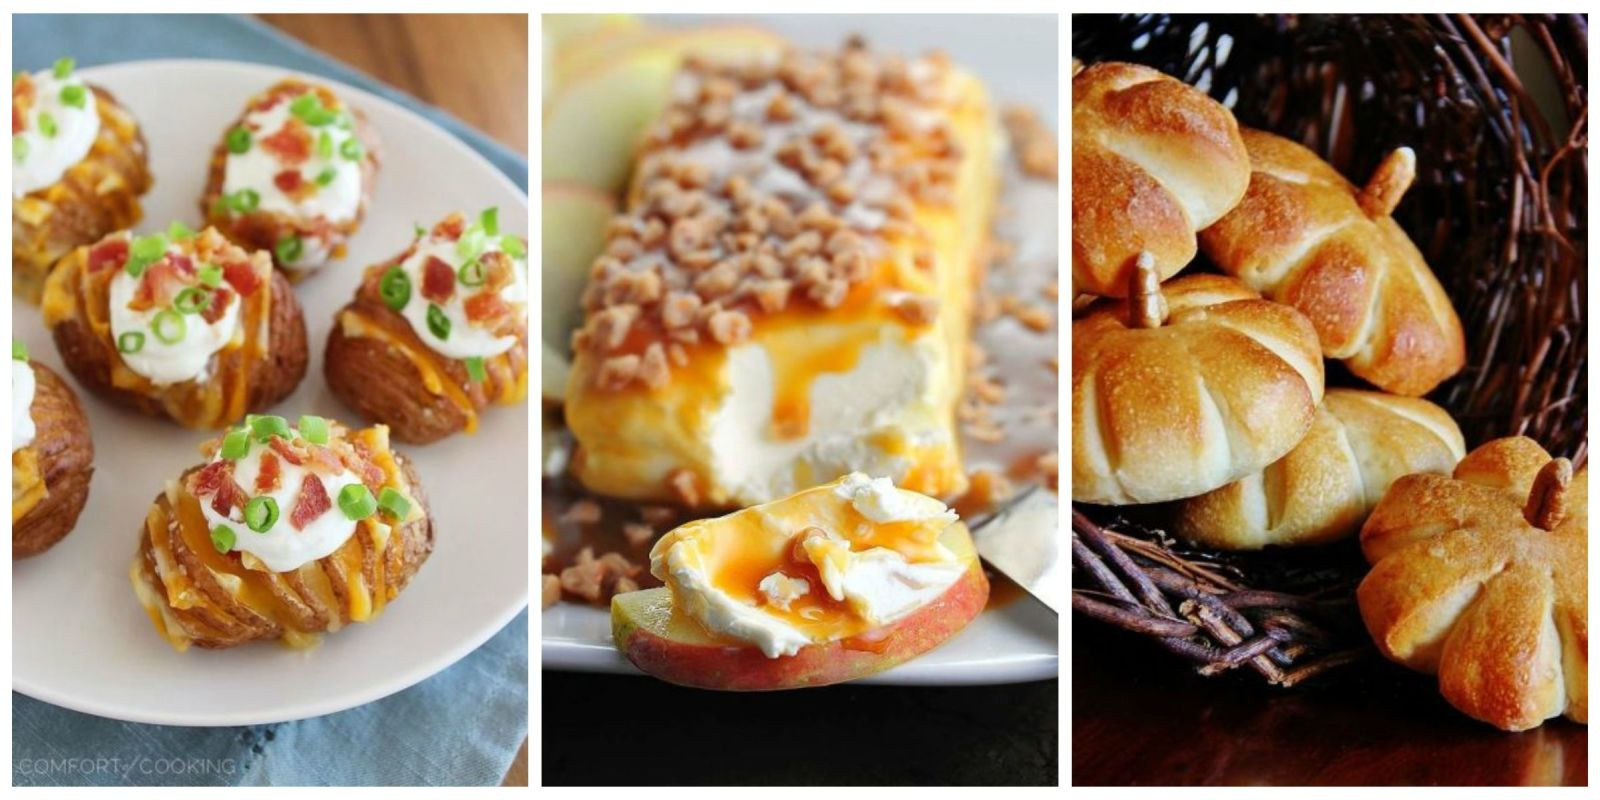 Best Appetizers For Thanksgiving
 34 Easy Thanksgiving Appetizers Best Recipes for